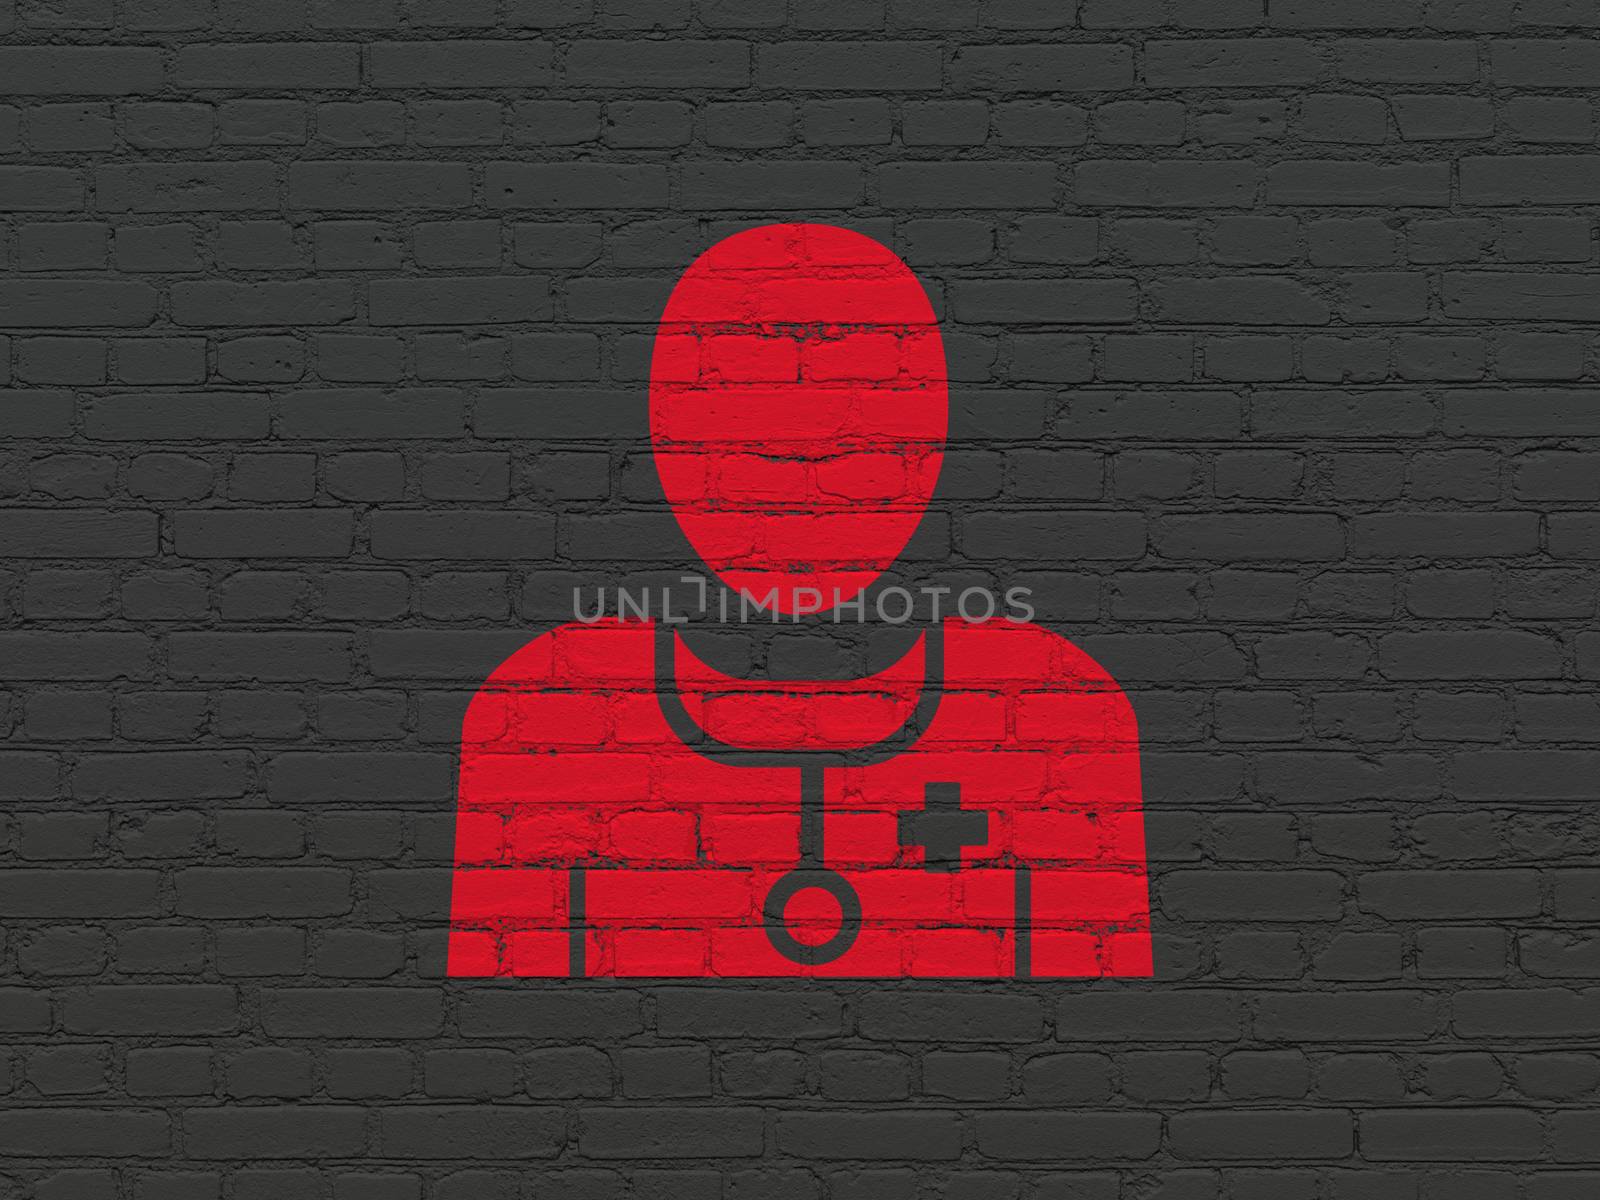 Health concept: Painted red Doctor icon on Black Brick wall background